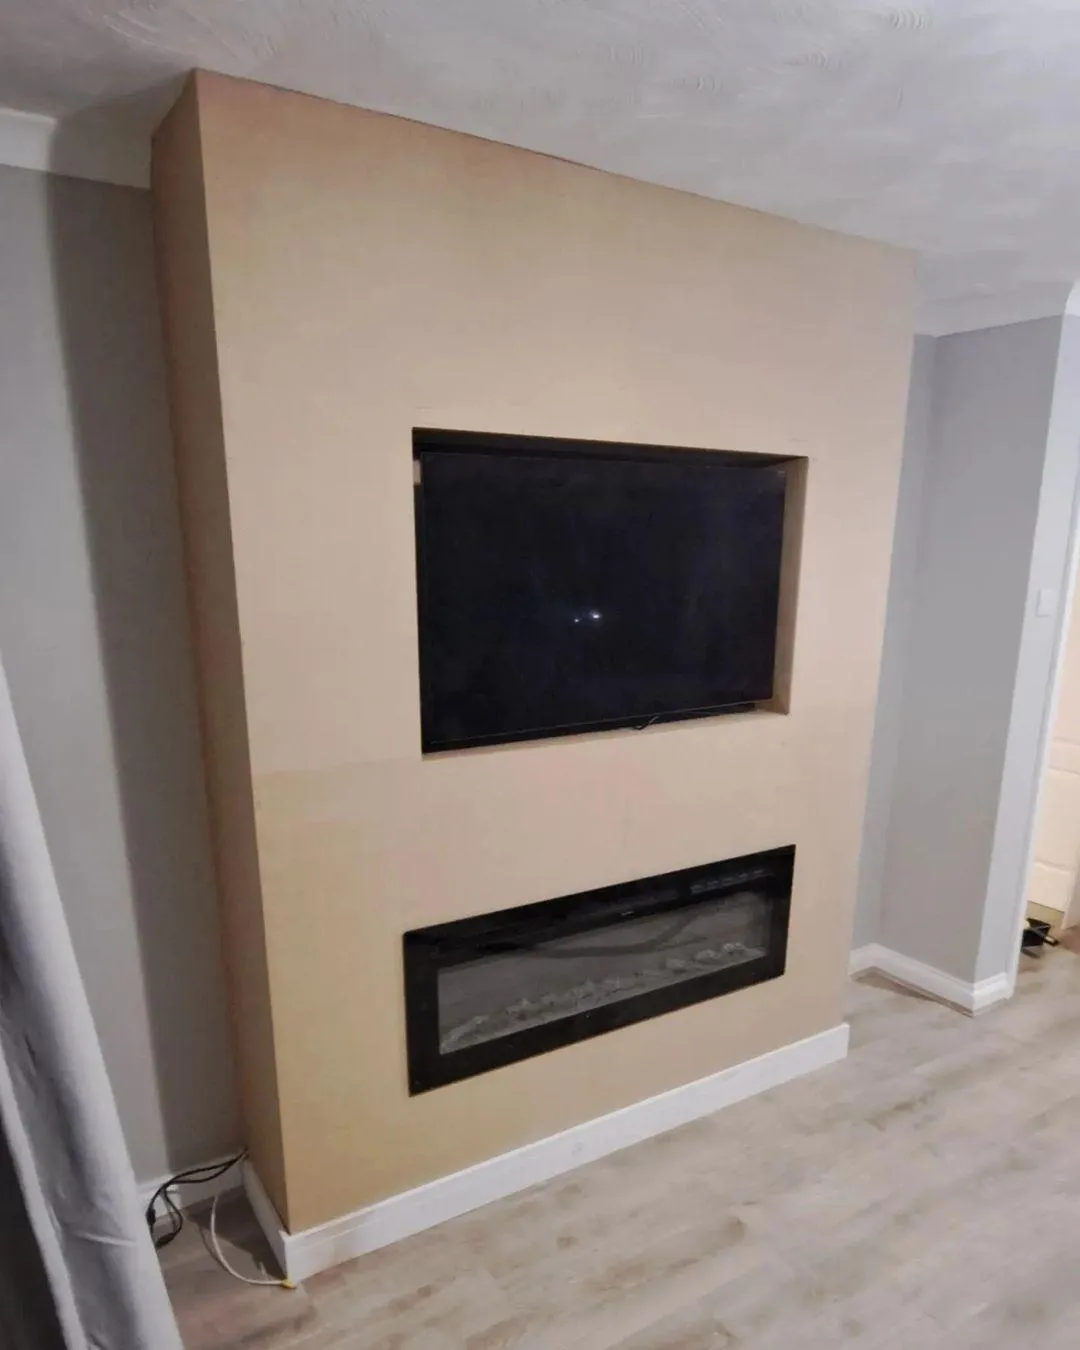 Modern media wall with integrated electric fireplace and recessed space for a flat-screen TV, meticulously constructed by a skilled joiner in the West Midlands, UK, to create a seamless and stylish living room feature, reflecting contemporary design and efficient use of space.